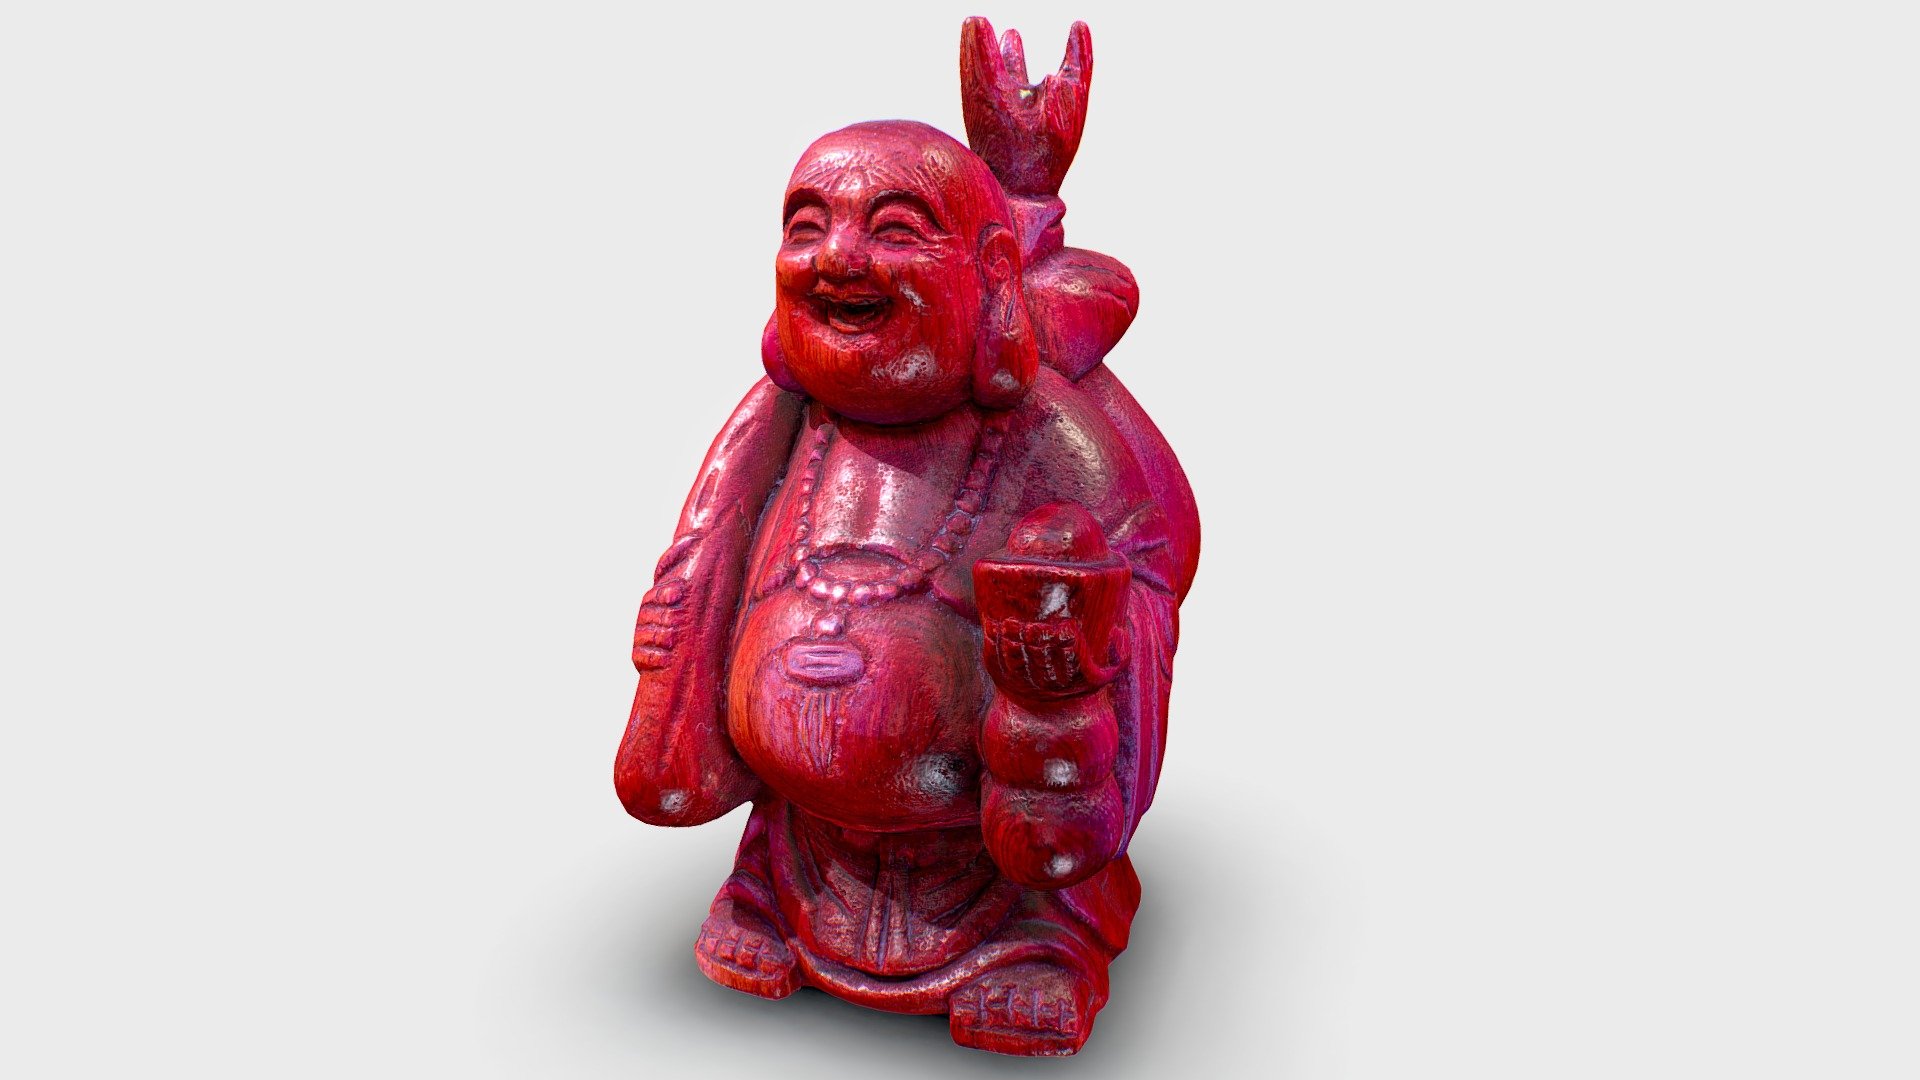 https://www.artstation.com/artwork/zOGm3d

Laughing Buddha decorative figure. Highly detailed 3D model, photorealistic photogrammetry 3d scanned model.
This model cood be figure, monument, statuette, decorative tool for architectural visualizations or props for your renders or games.
Budai is a semi-historical Chinese monk who is venerated as Maitreya Buddha in Chan Buddhism. 

8k, 4k, 2k texture maps,  optimized topology,  uv unwrapped,  2 level of detalies, low poly 12,664 vertices and mid poly 50,650 vertices  3 diffrent textures wood (scanned), gold, and jade  Mesh maps
Base_Color  Ambient_occlusion  Diffuse  Height  Normal  Roughness  Mixed_AO  I try to achieve the highest quality. feel free to contact me if you have any questions or concerns - Laughing Buddha - 3D model by truekit 3d model